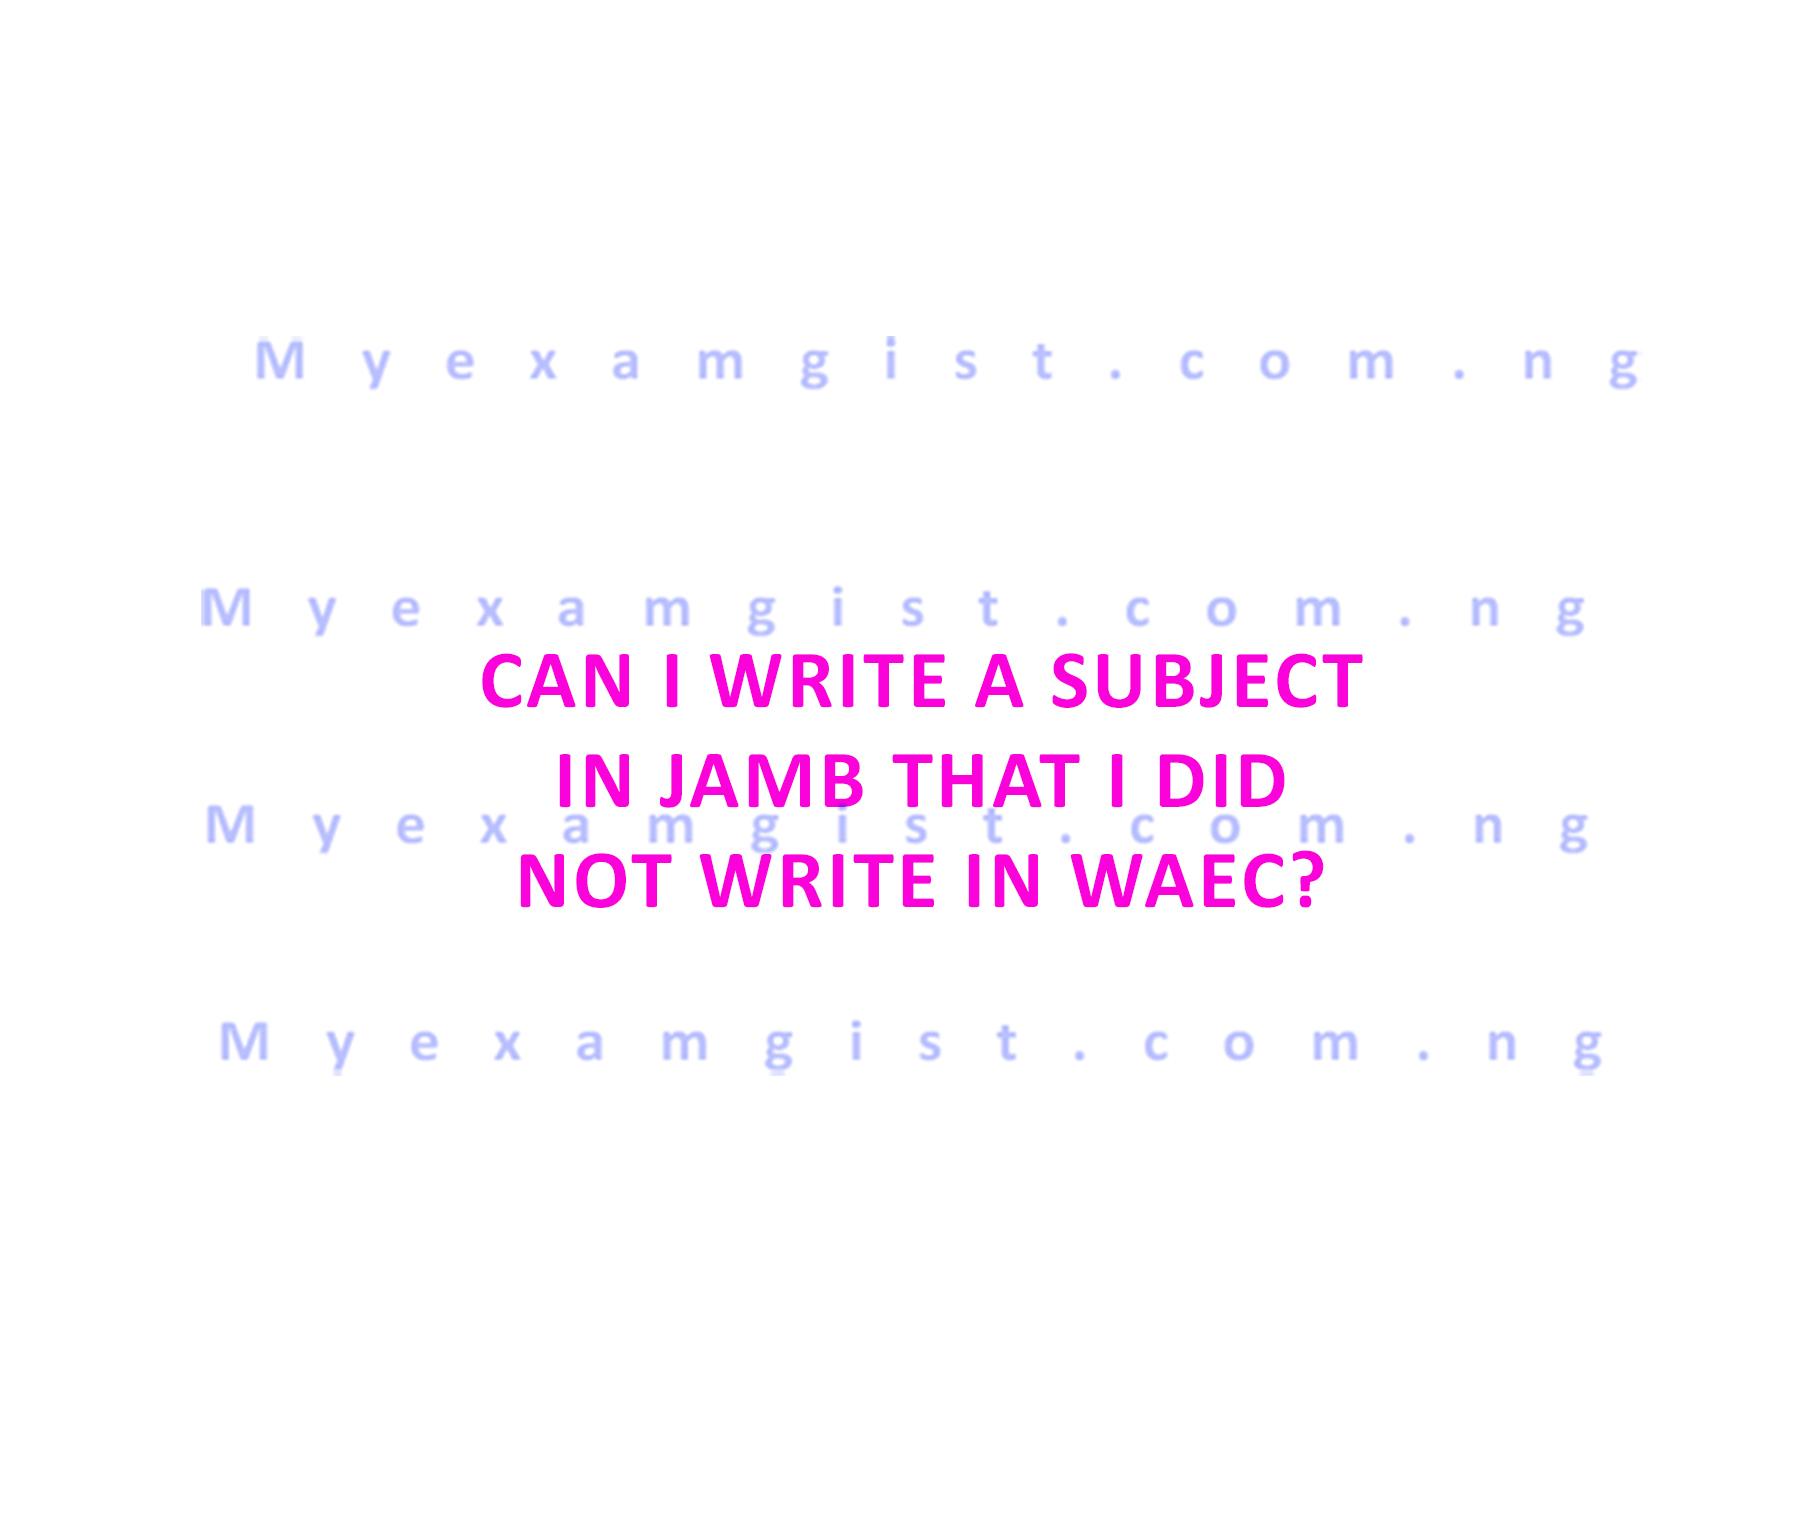 Can I write a subject in JAMB that I did not write in WAEC?